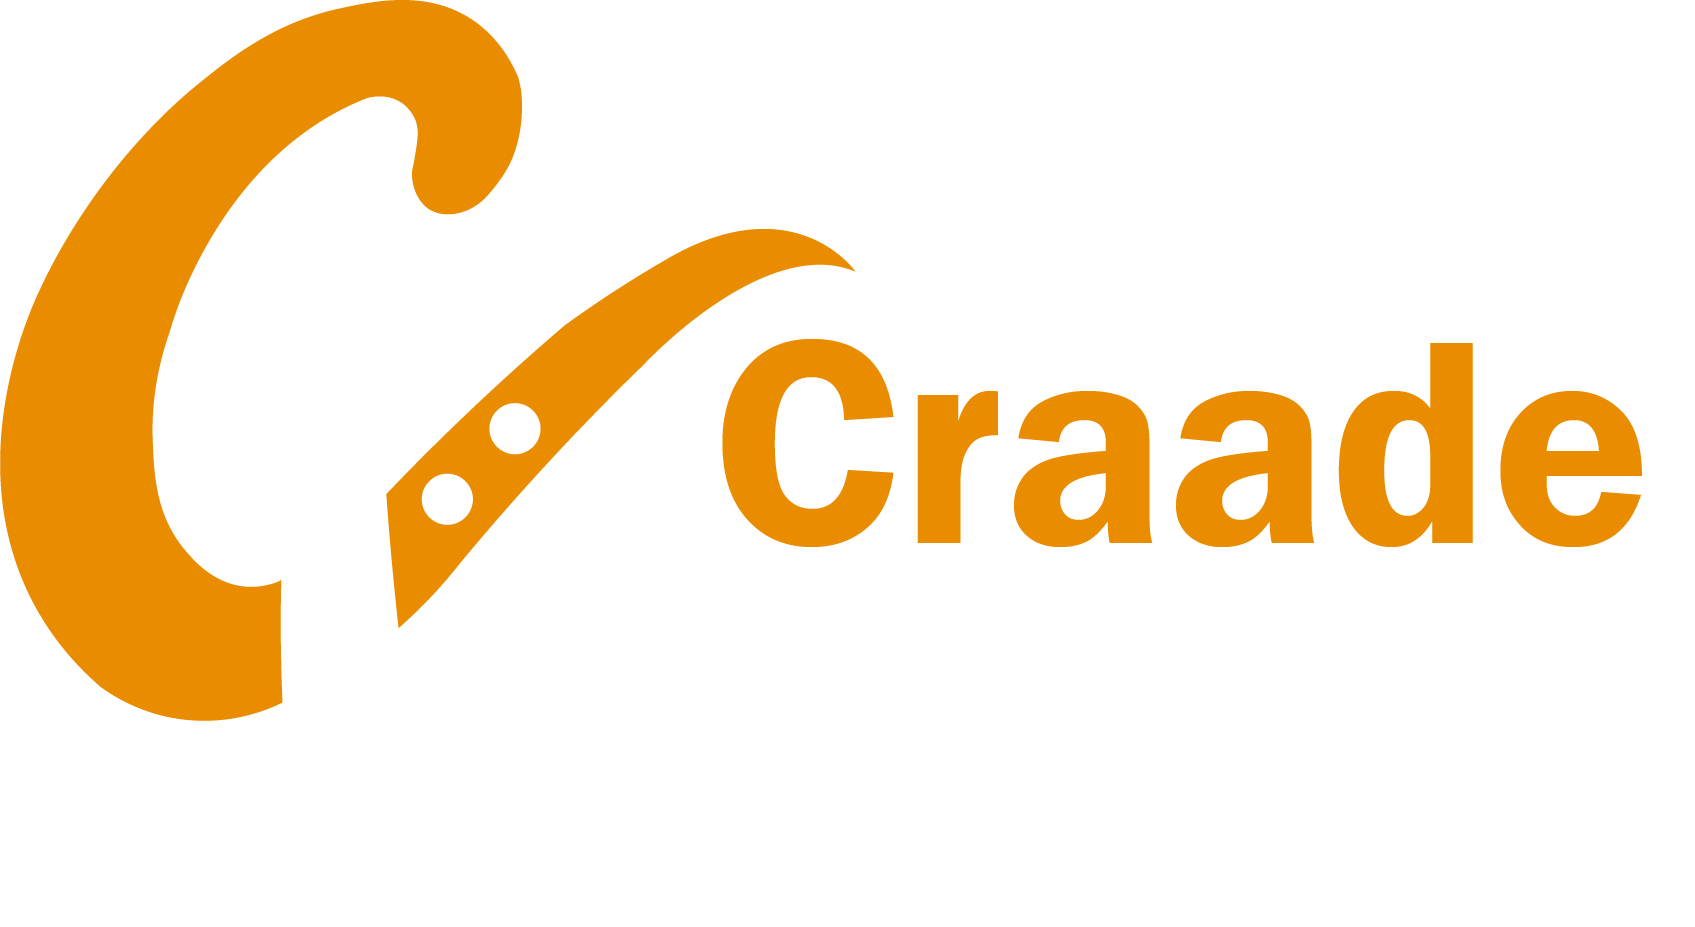 Craade Hosting Services